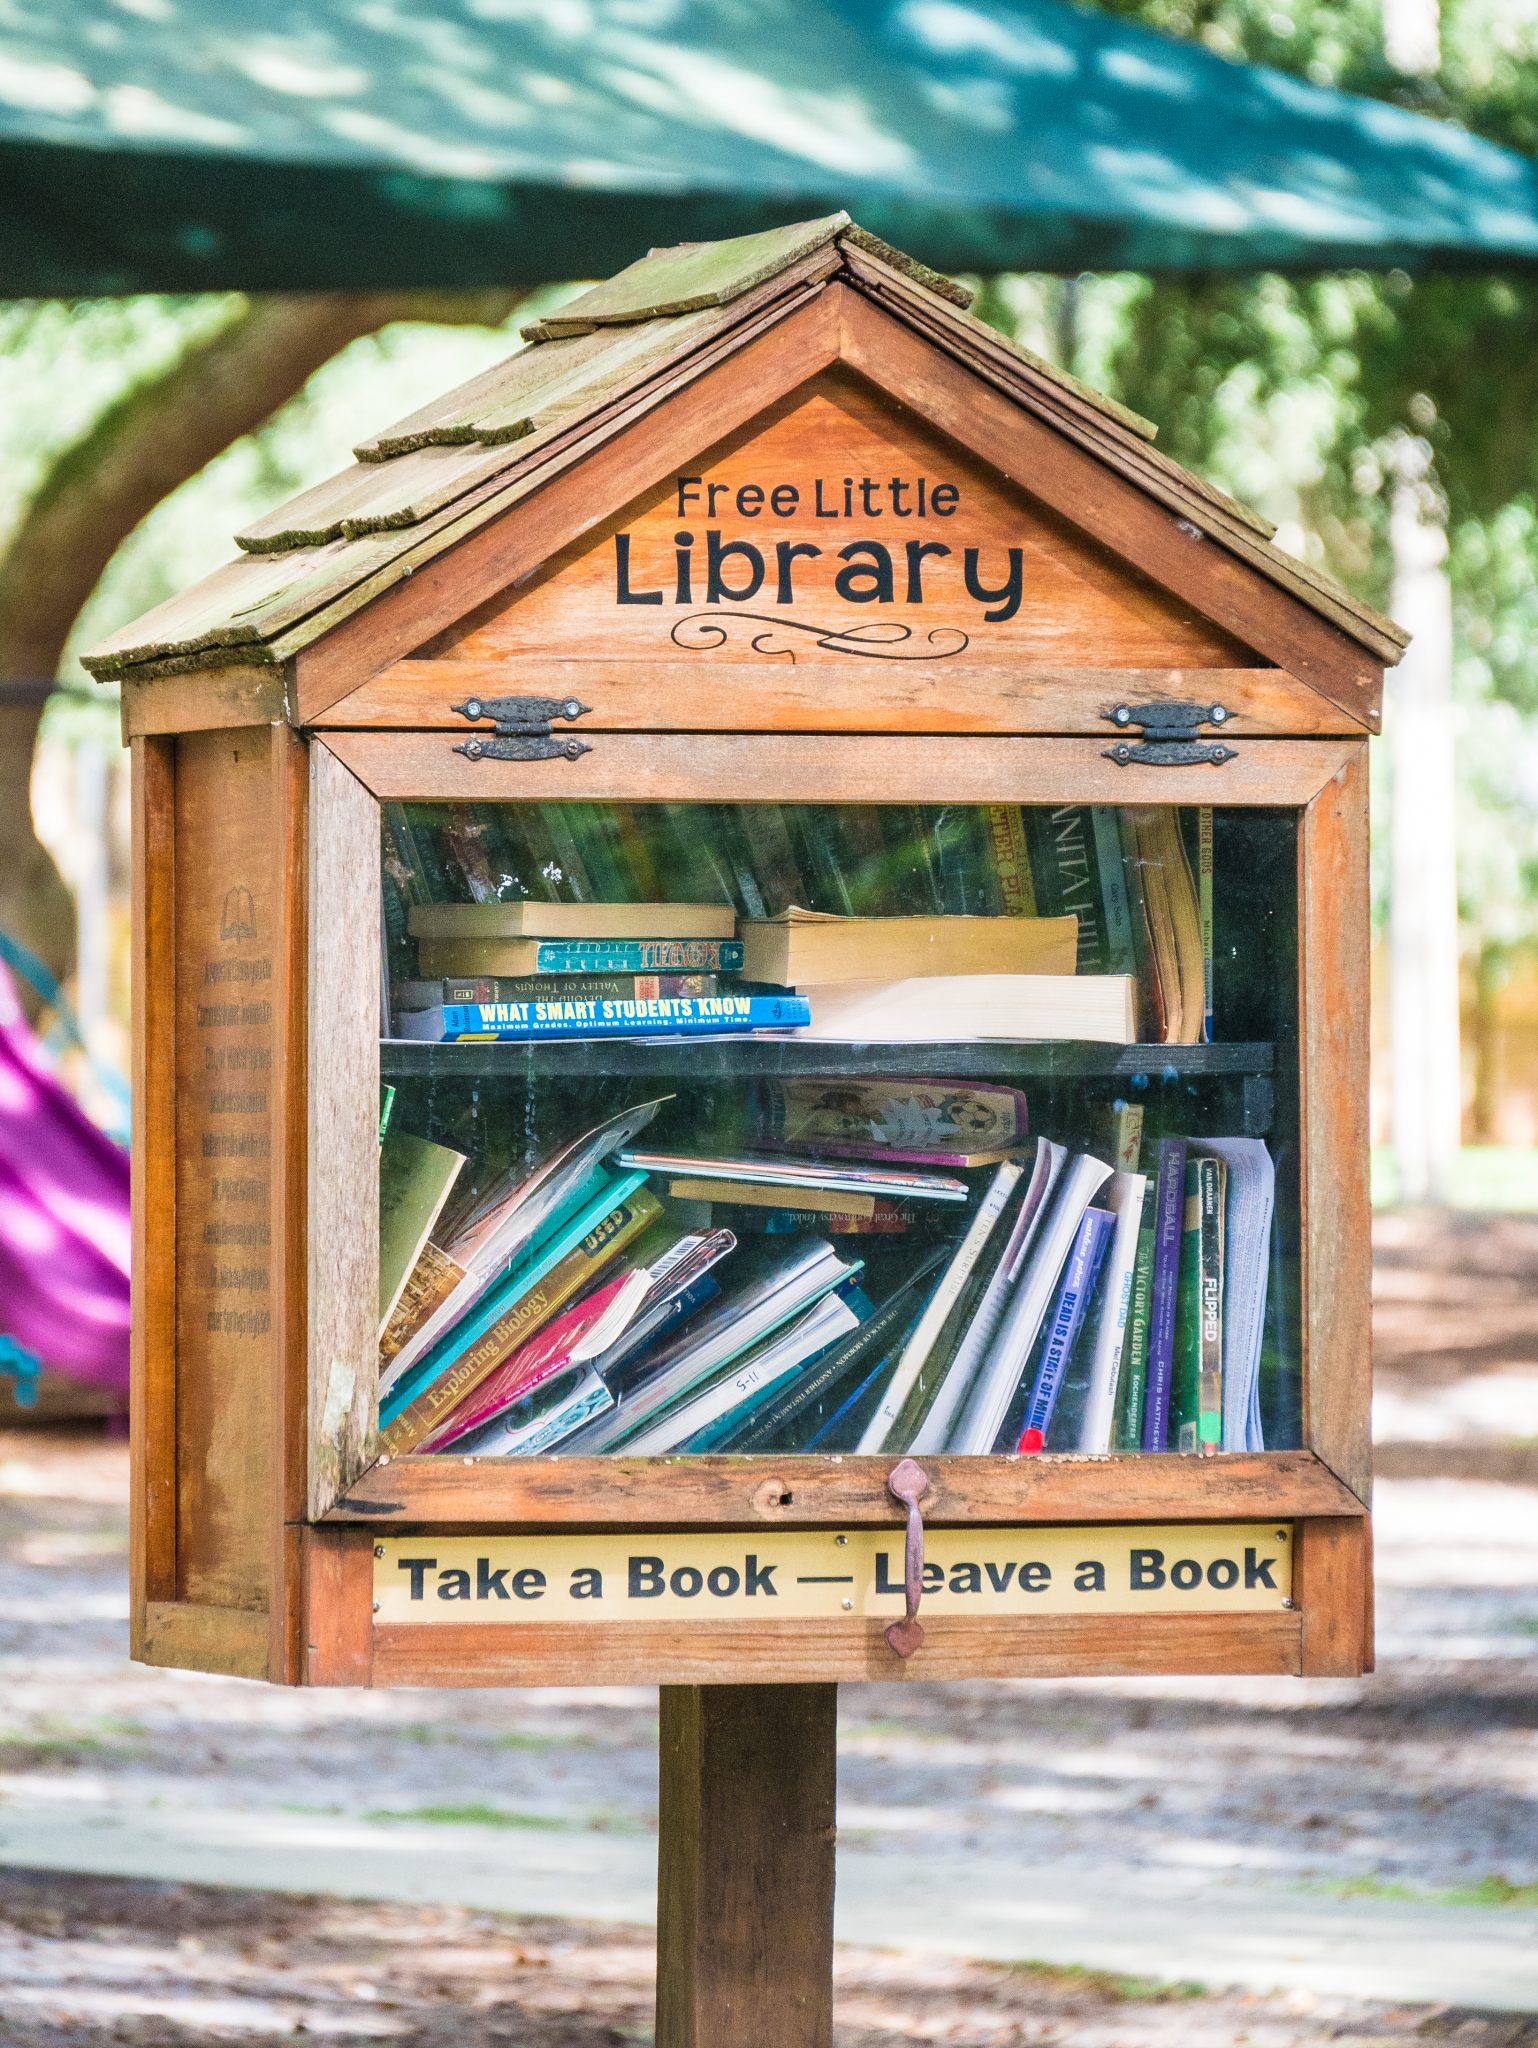 Free book library at a park